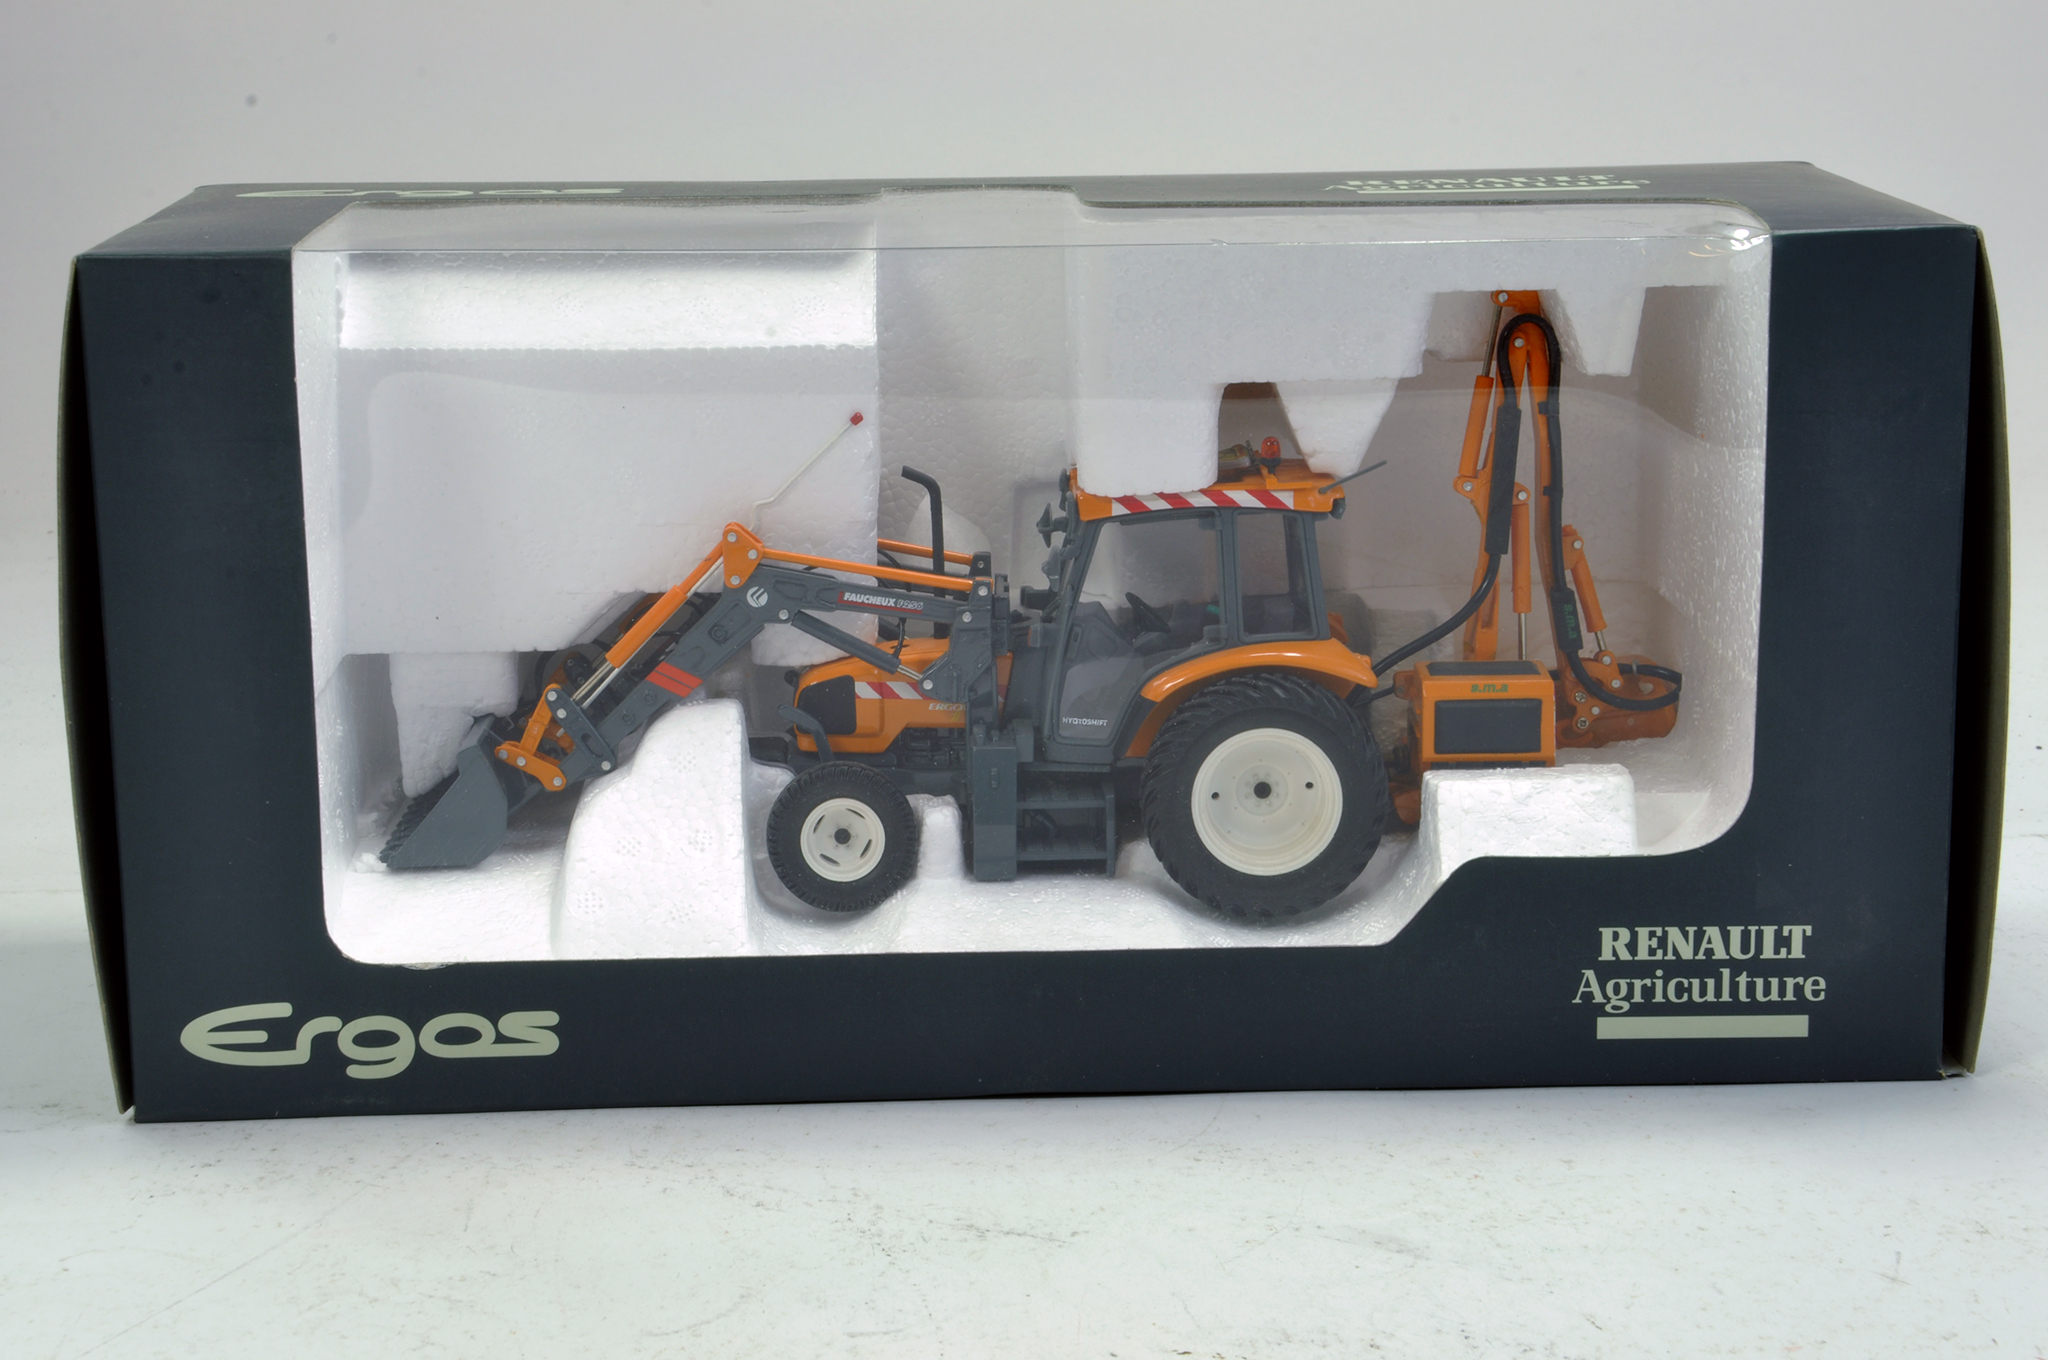 UH 1/32 Renault Ergos Tractor with Front Loader and Hedgecutter. Looks to be near mint, likely to